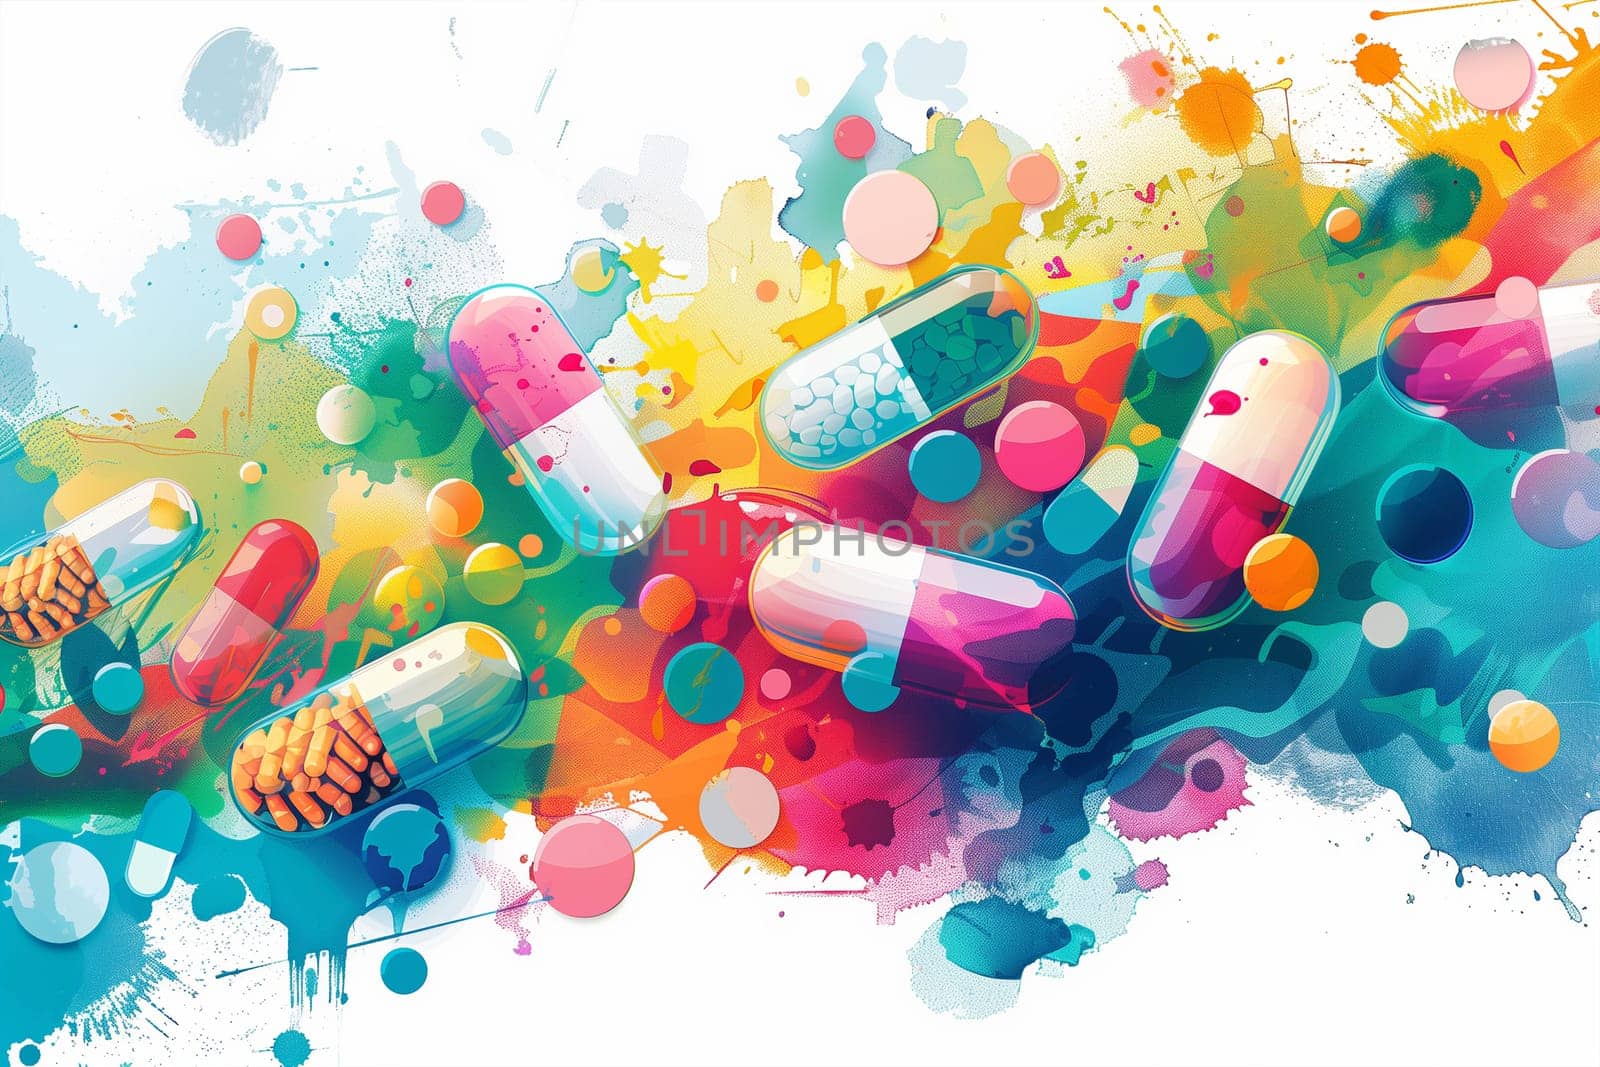 A vivid painting depicting an array of colorful pills arranged on a stark white background.